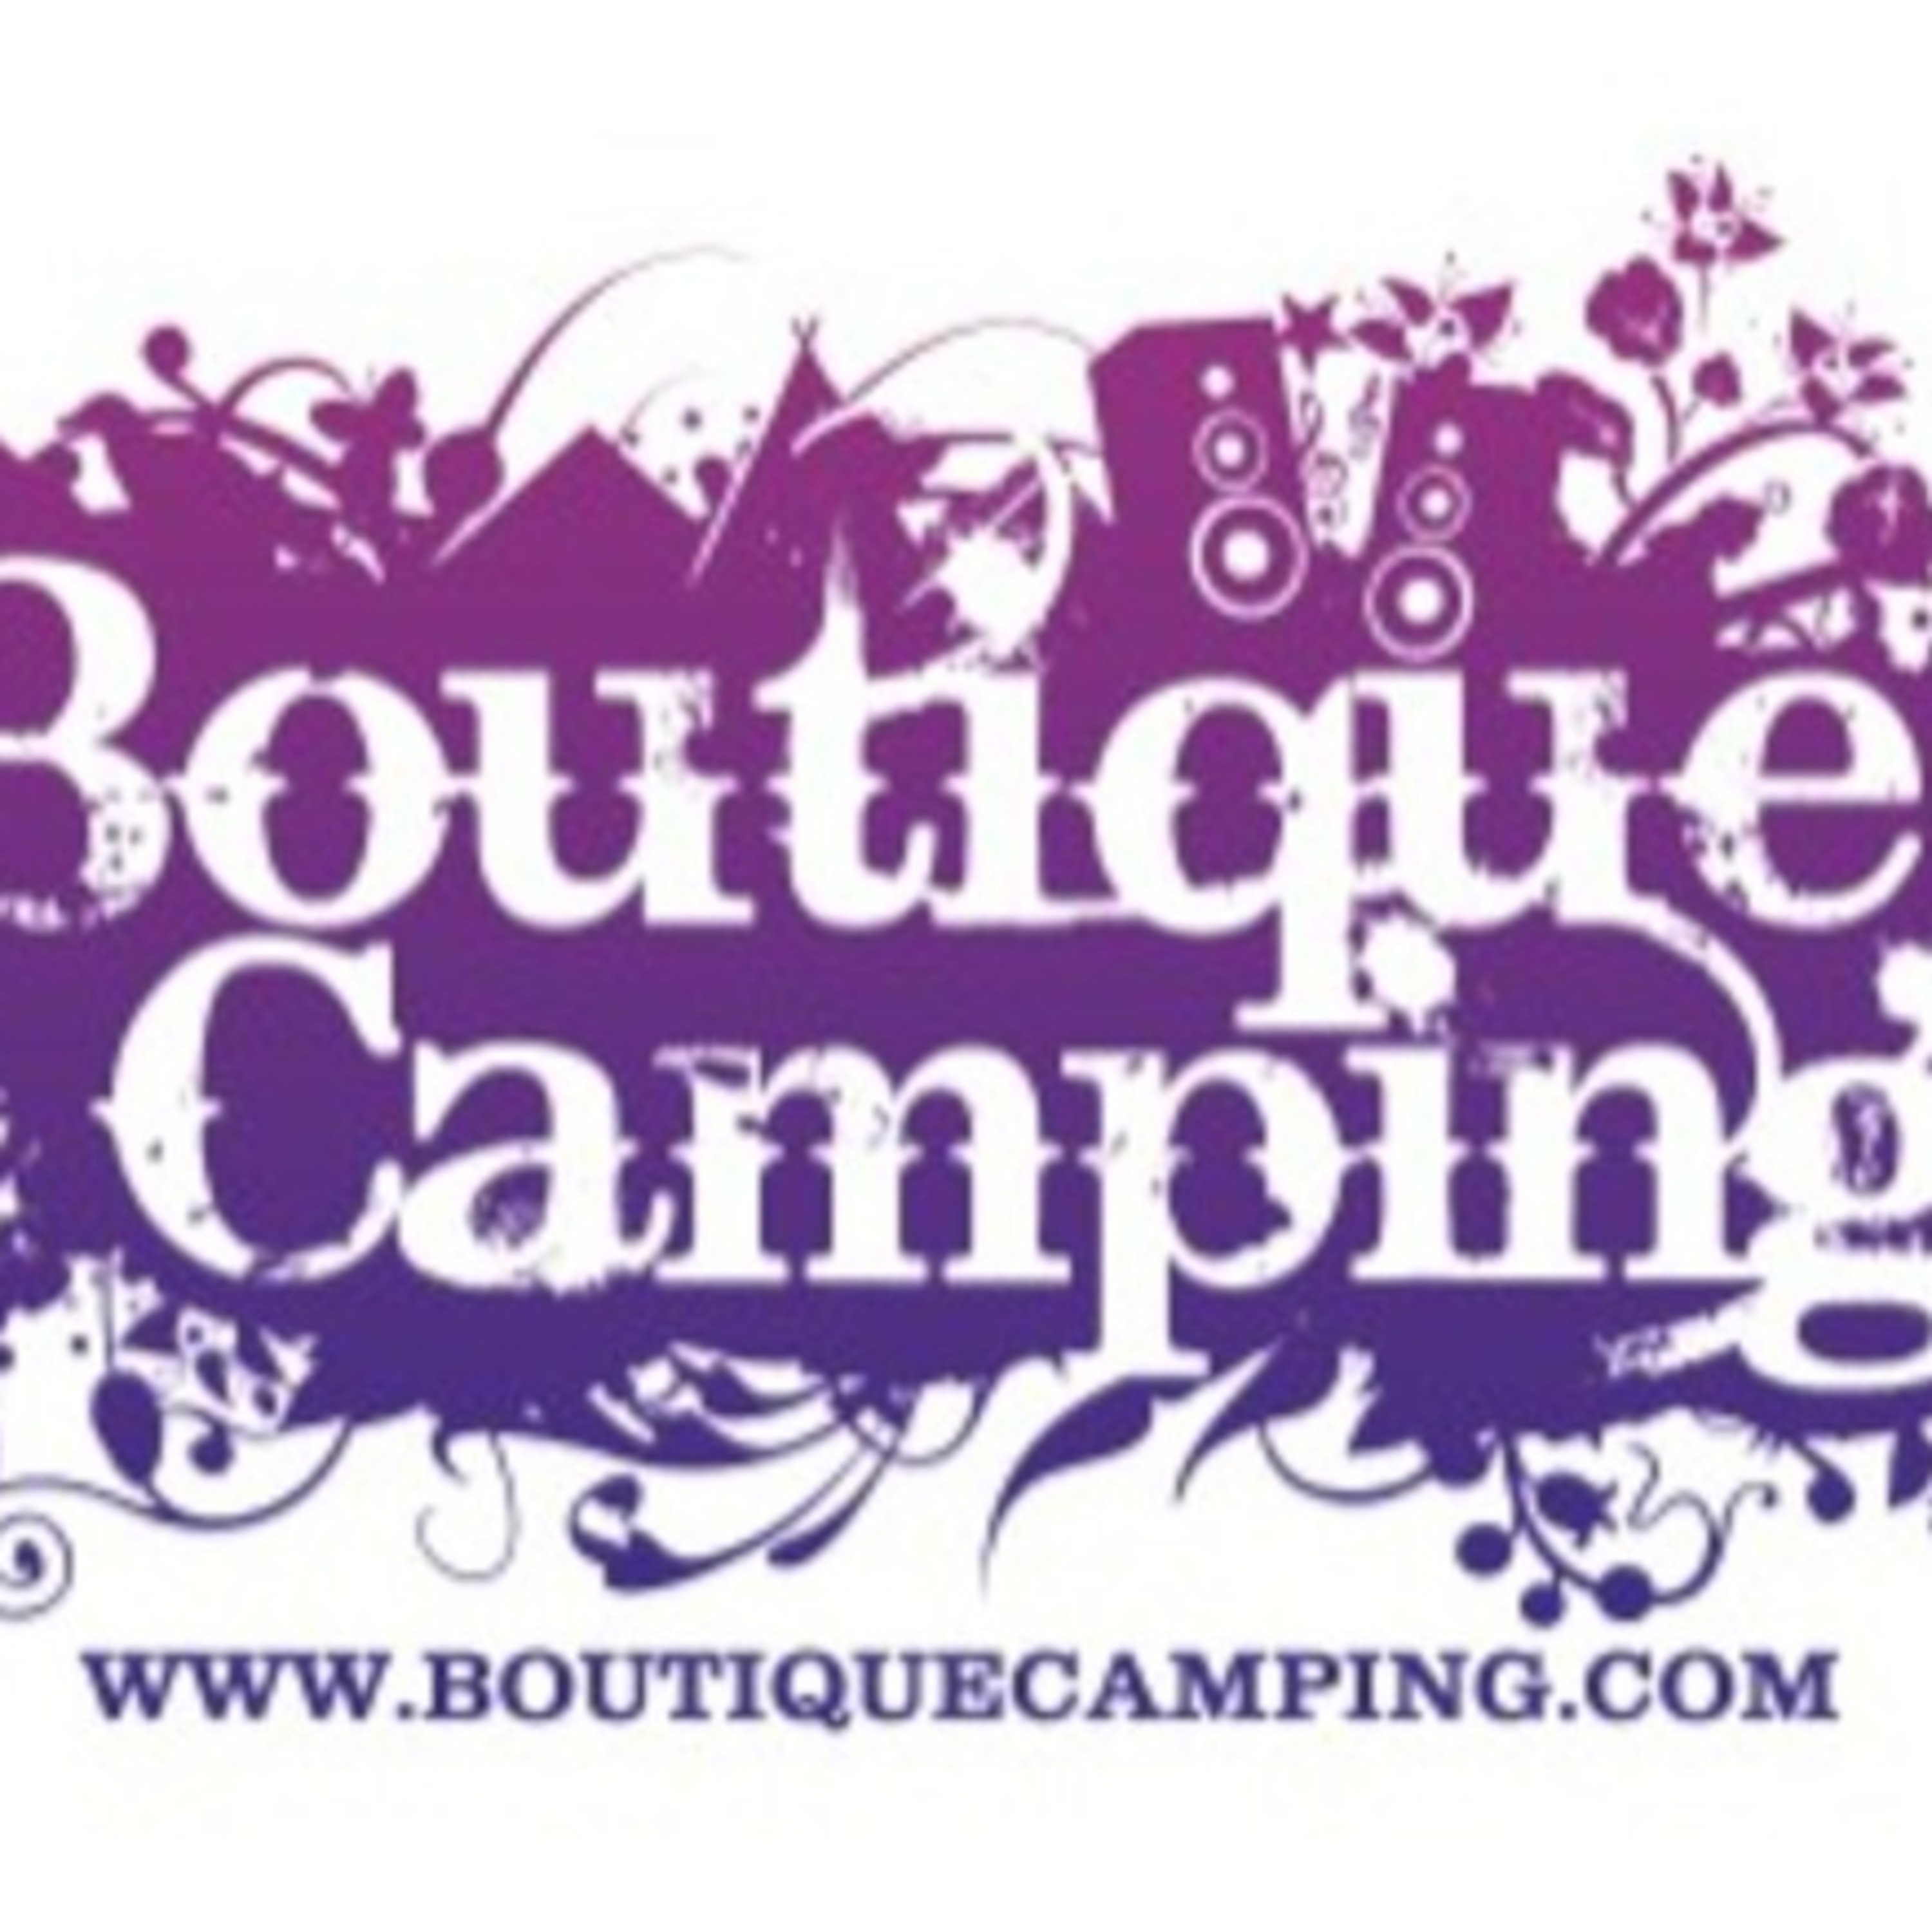 Boutique Camping Podcast